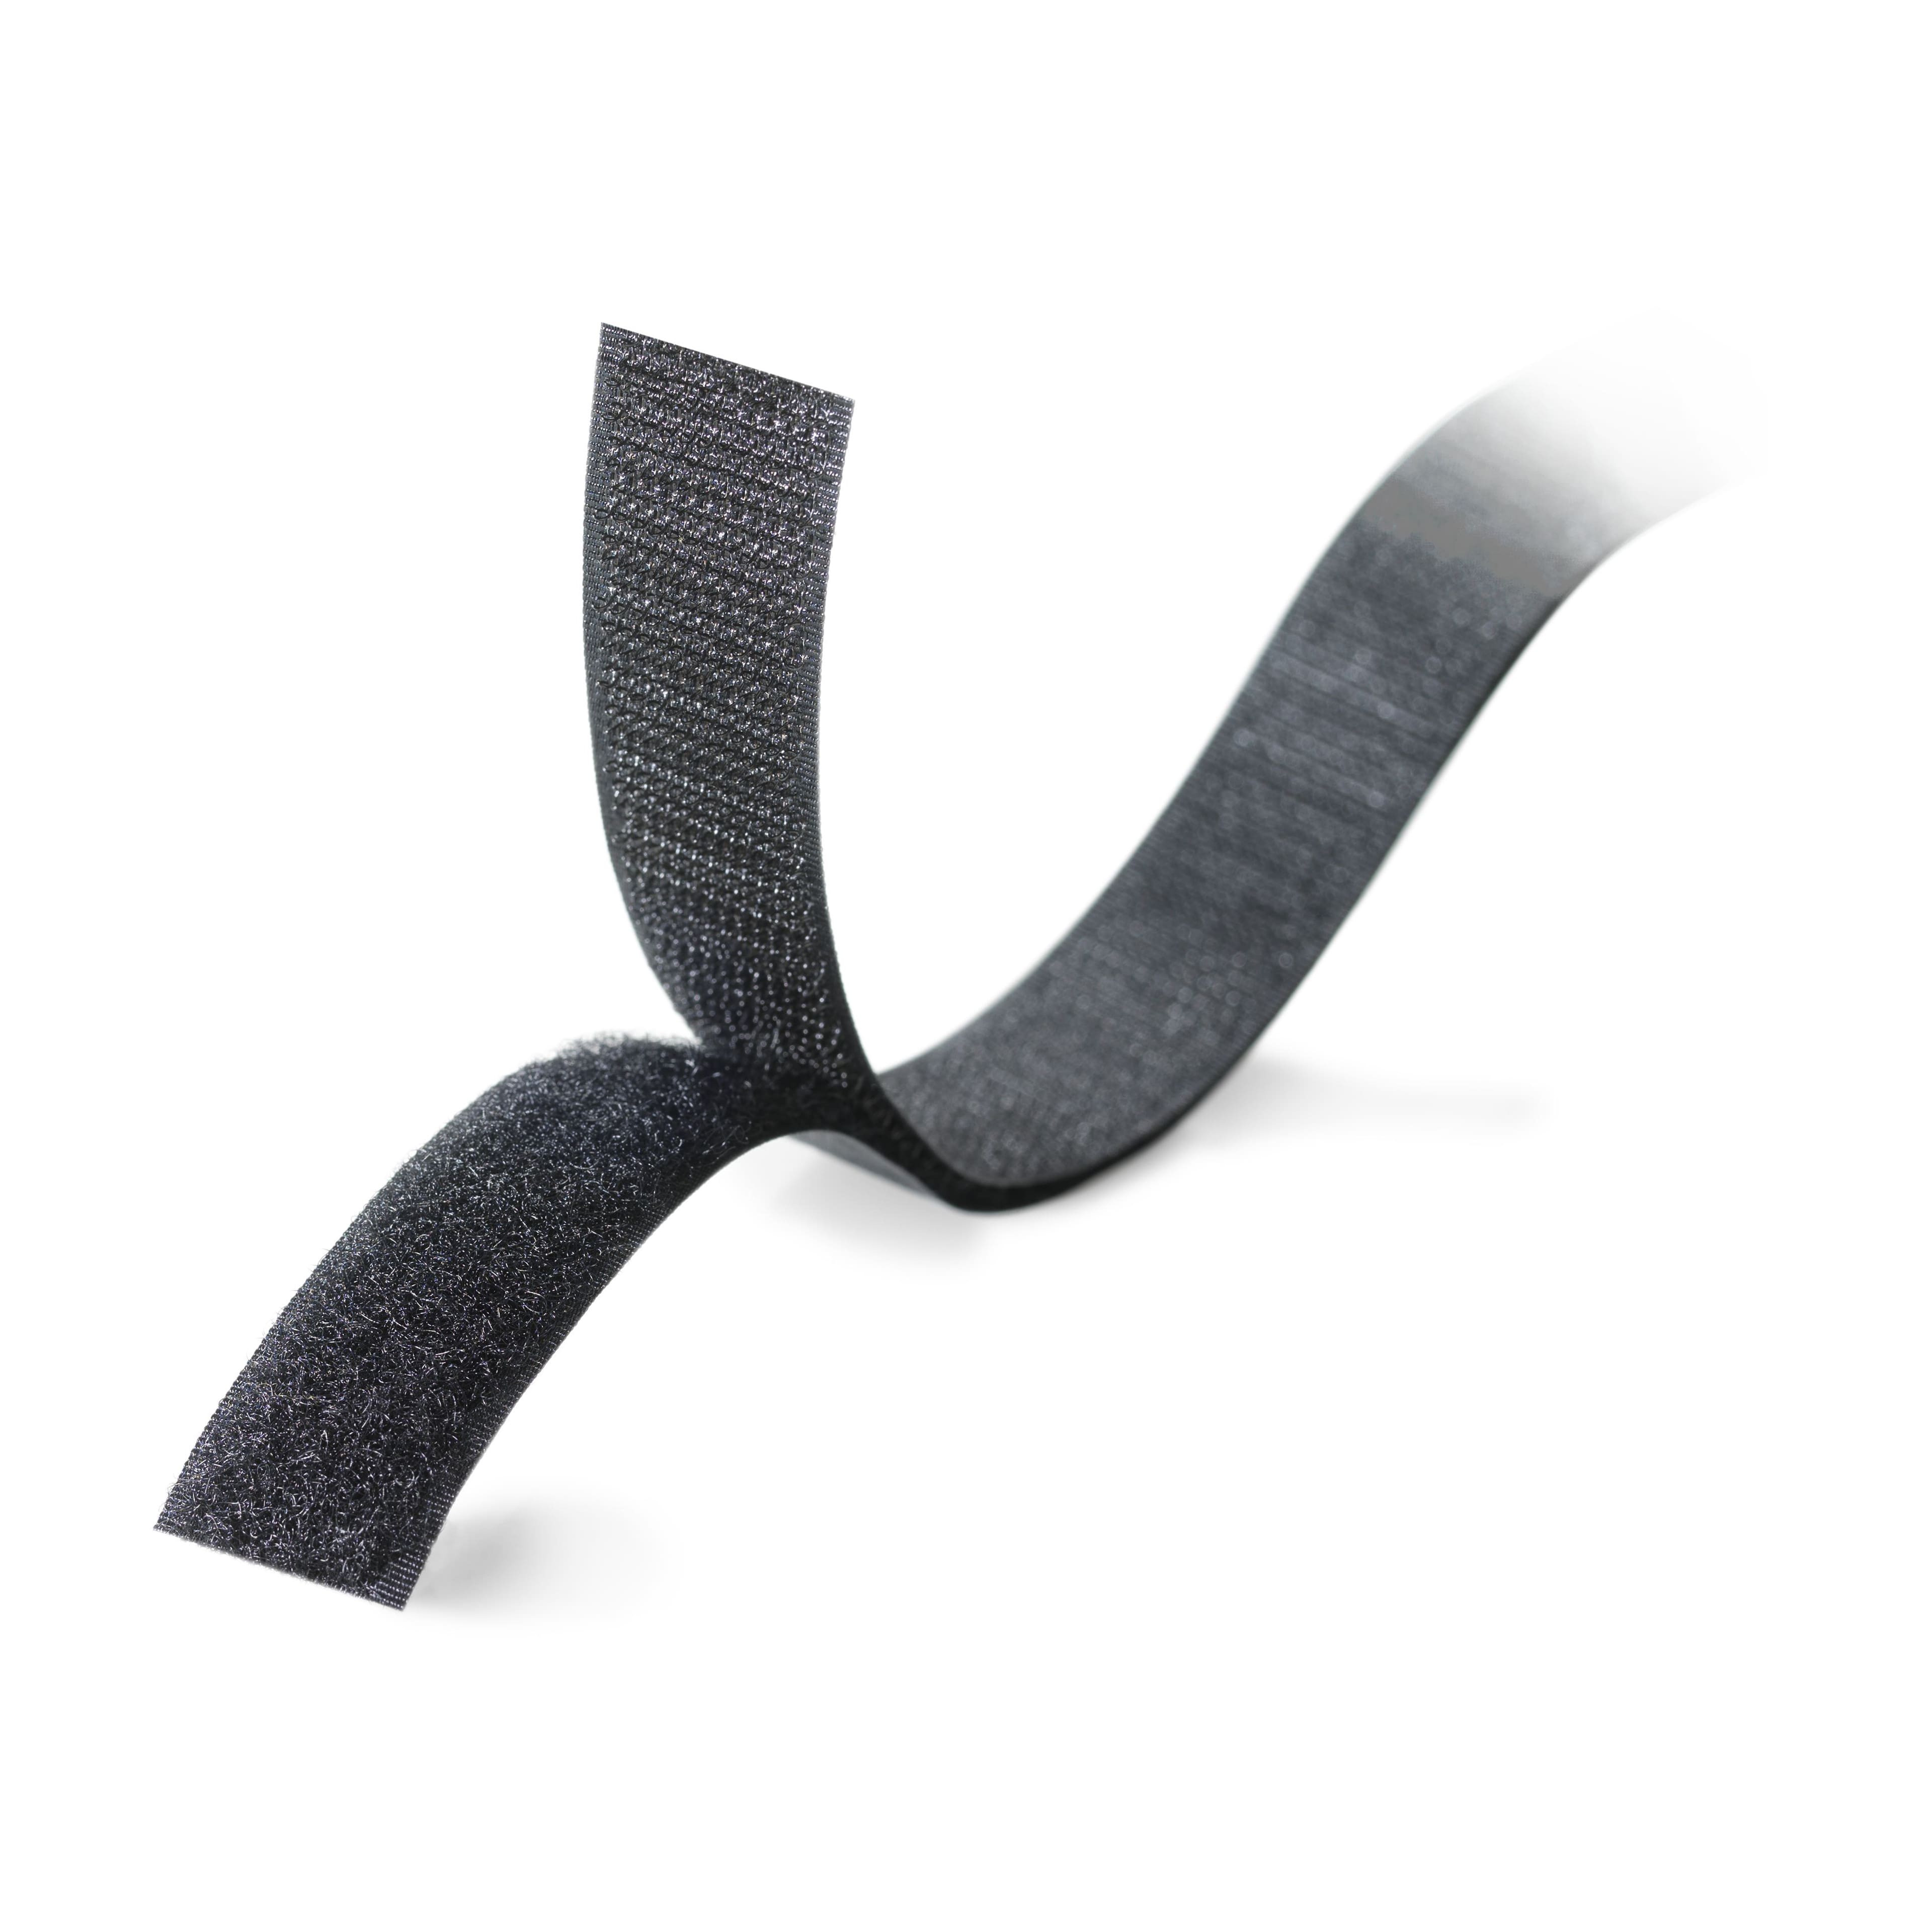 172208 Velcro SEW-ON TAPE BLK 150FT. L 2 W HOOK : PartsSource : PartsSource  - Healthcare Products and Solutions